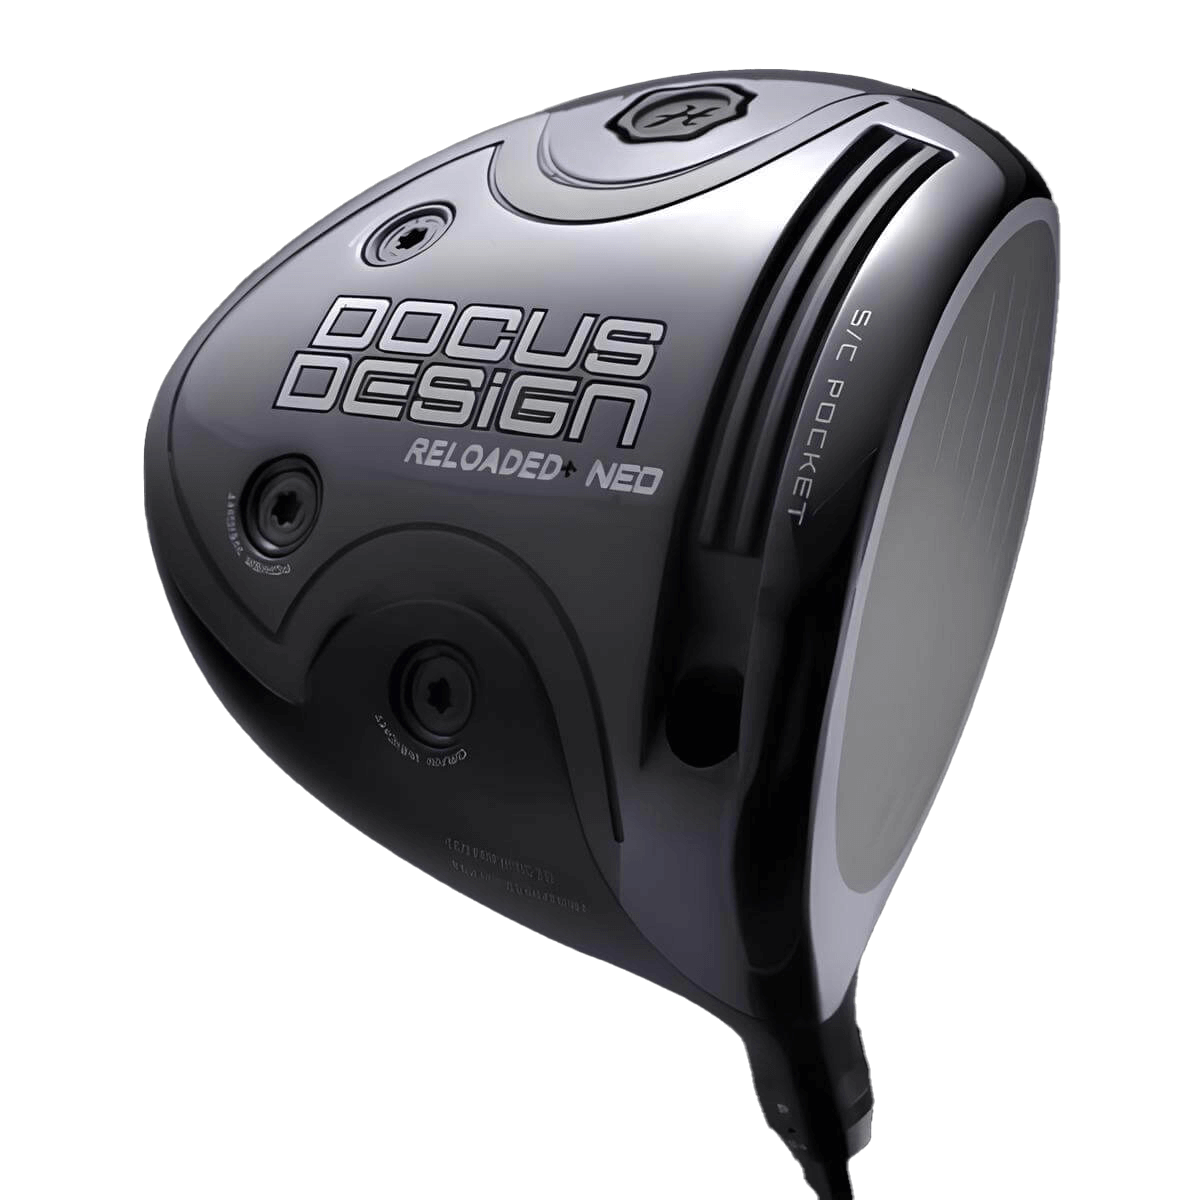 Reloaded neo driver golf